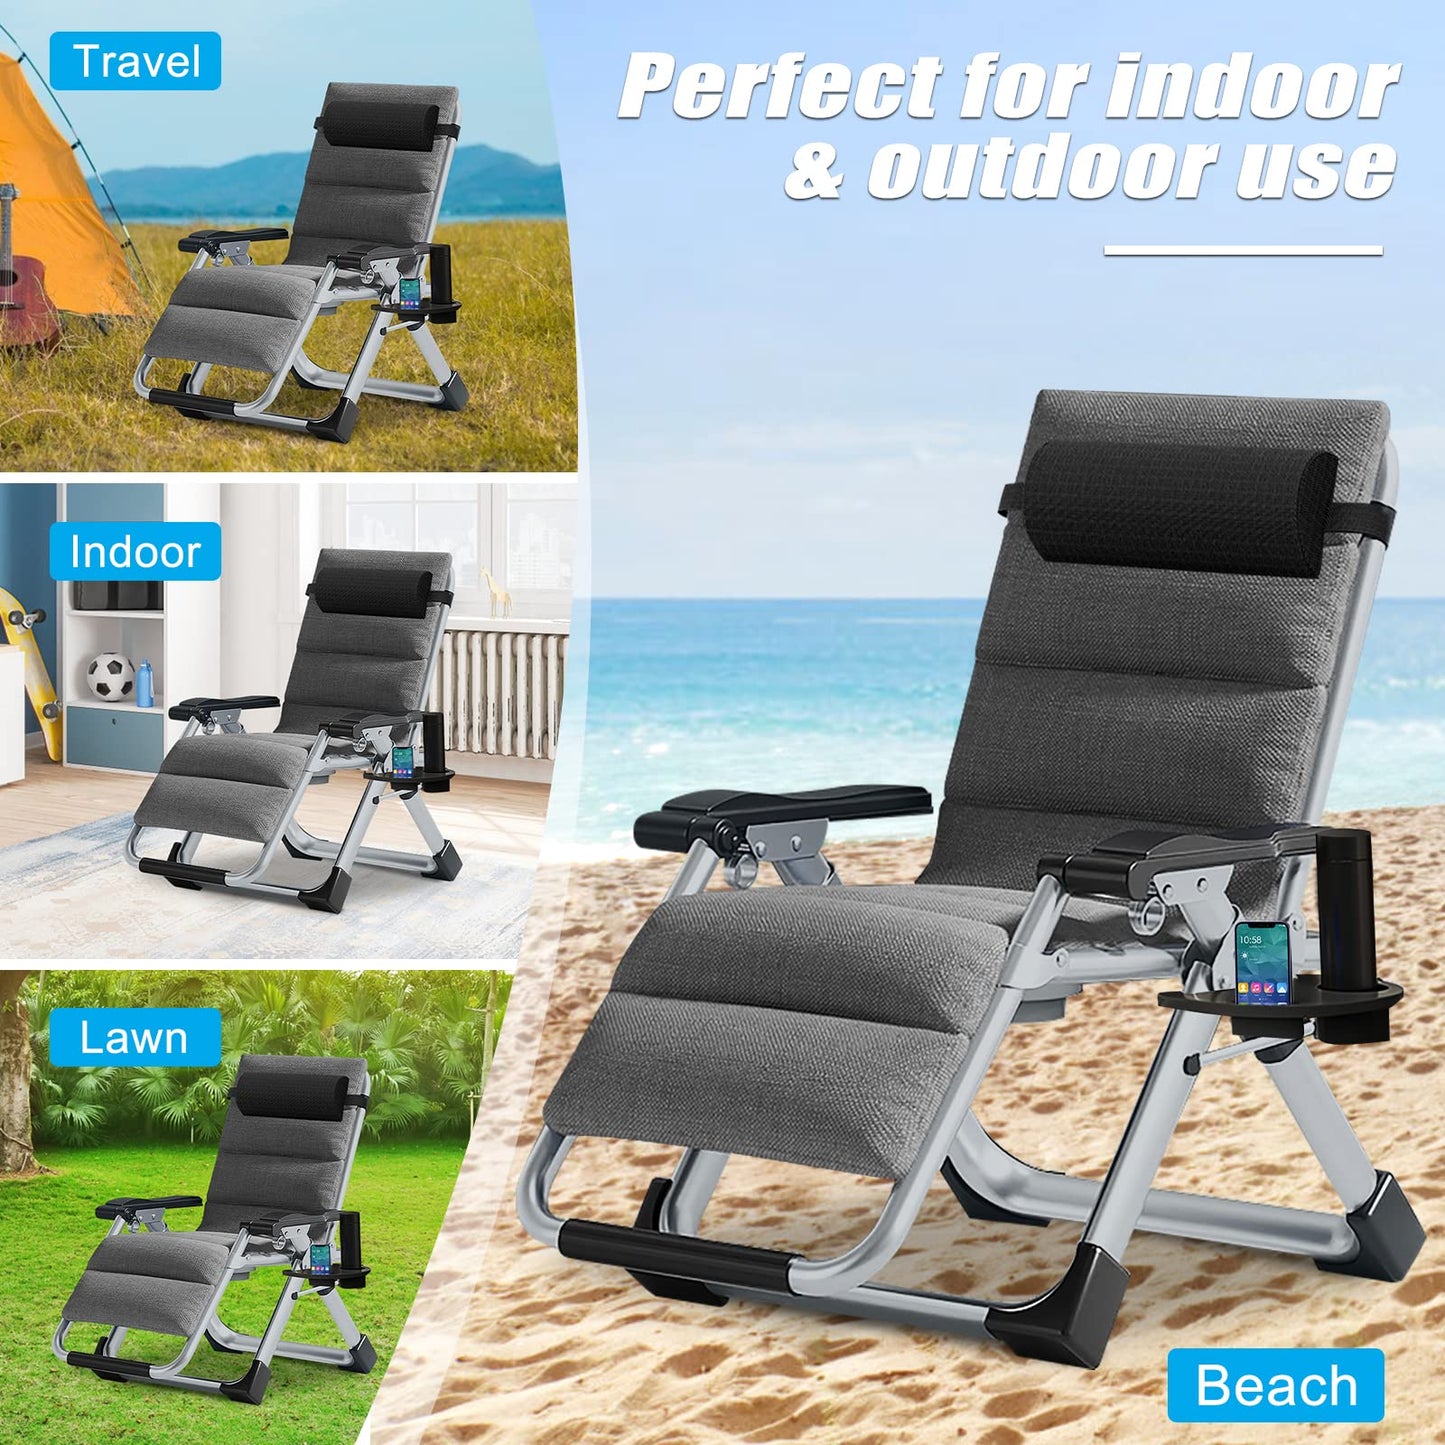 Zero Gravity Chair, Lawn Recliner, Reclining Patio Lounger Chair, Folding Portable Chaise with Detachable Soft Cushion, Cup Holder, Headrest Textured Grey Zero Gravity Chair-2Pack